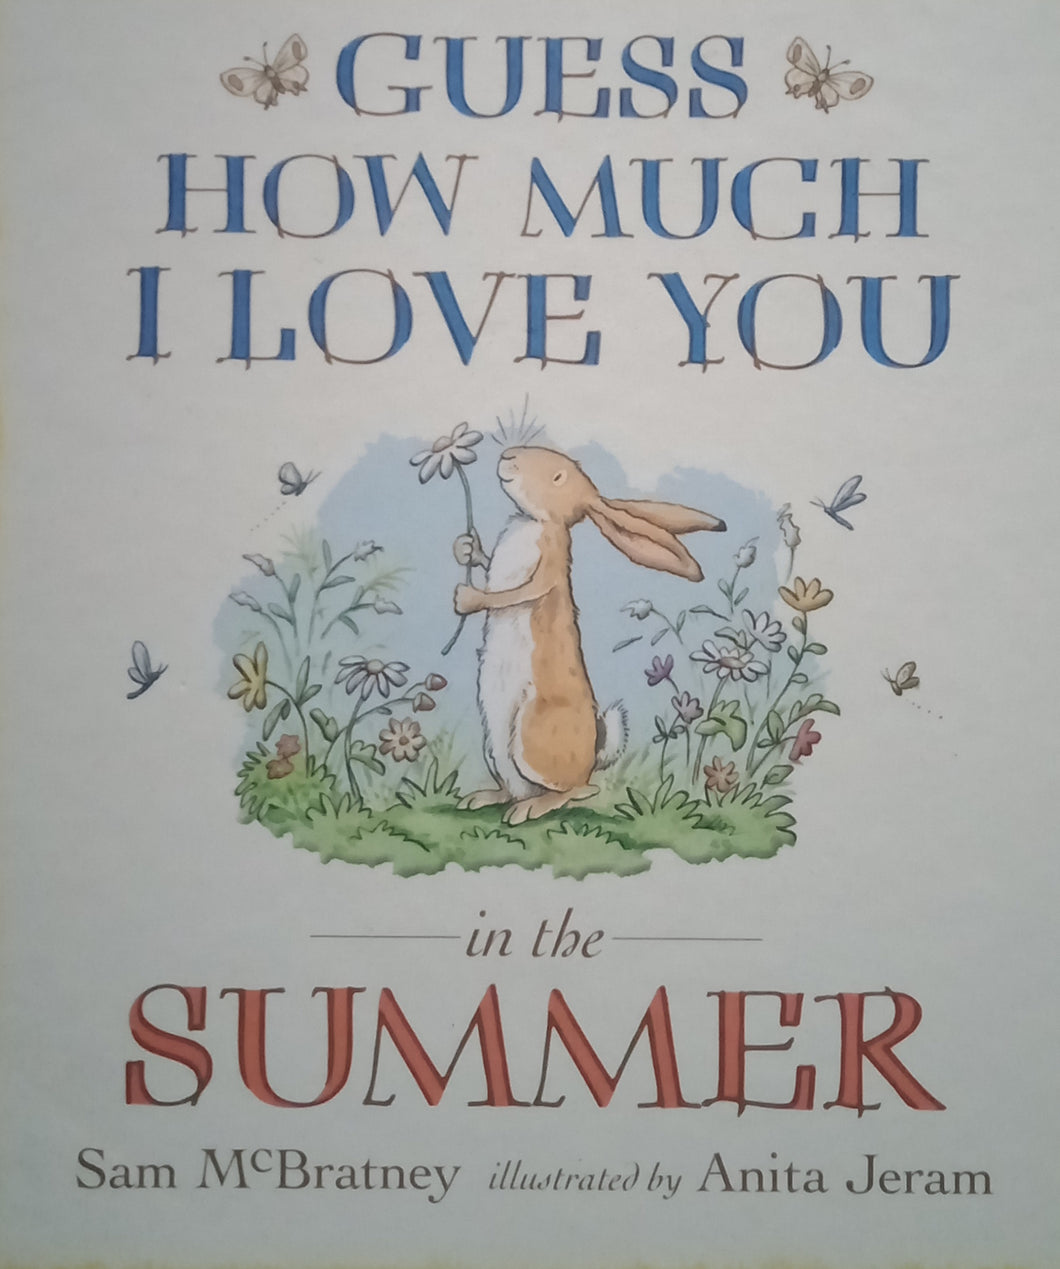 Guess How Much I Love You In The Summer by Sam McBratney